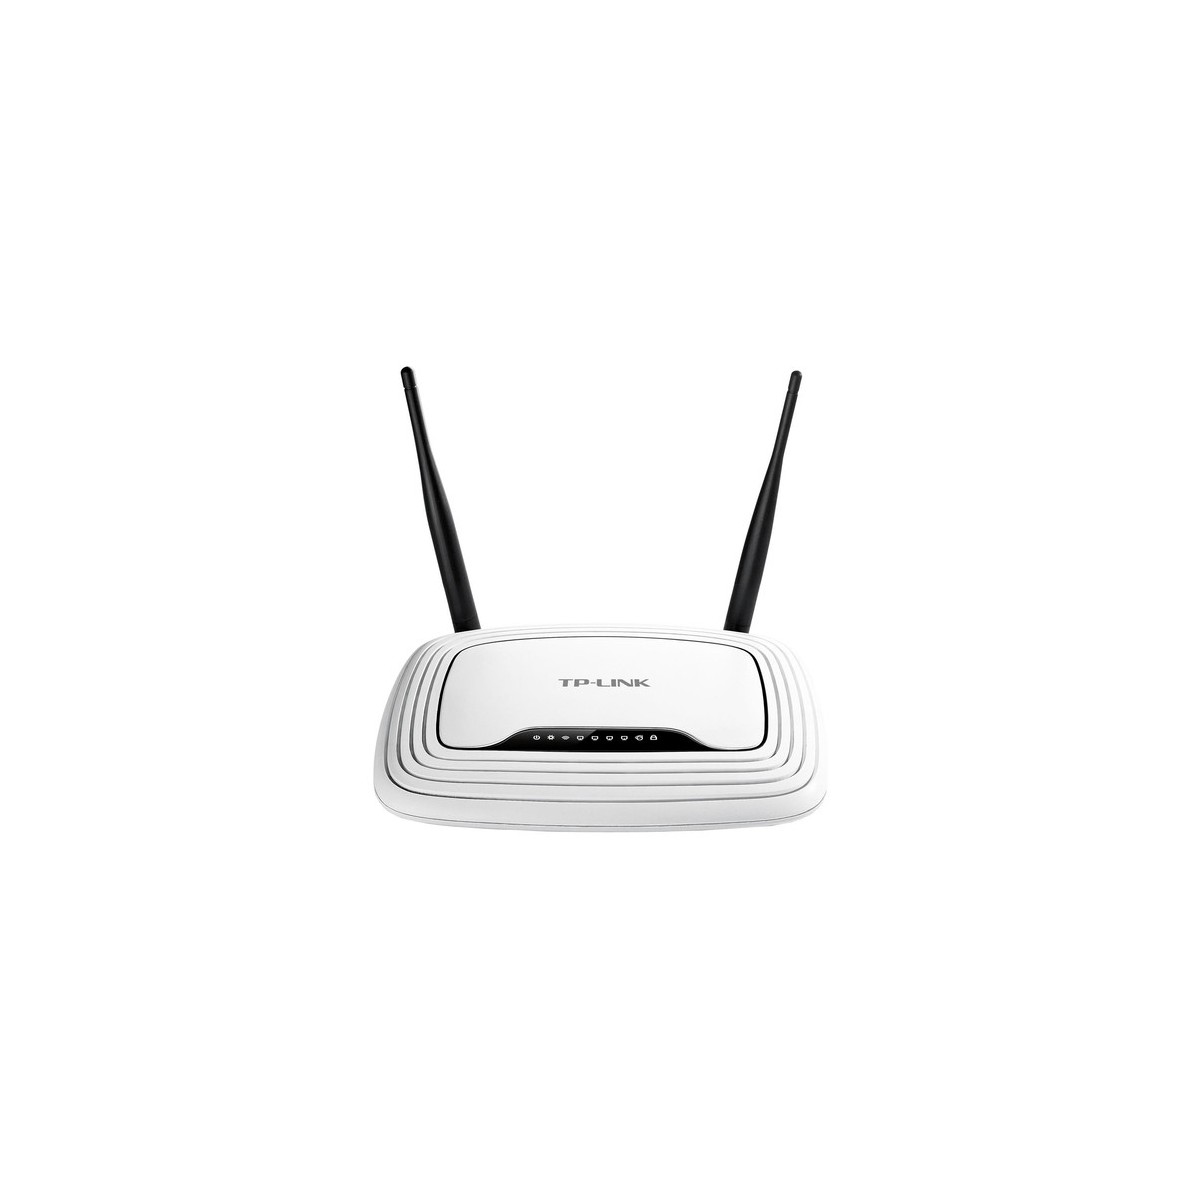 ROUTER INALaMBRICO TP LINK 300MBPS